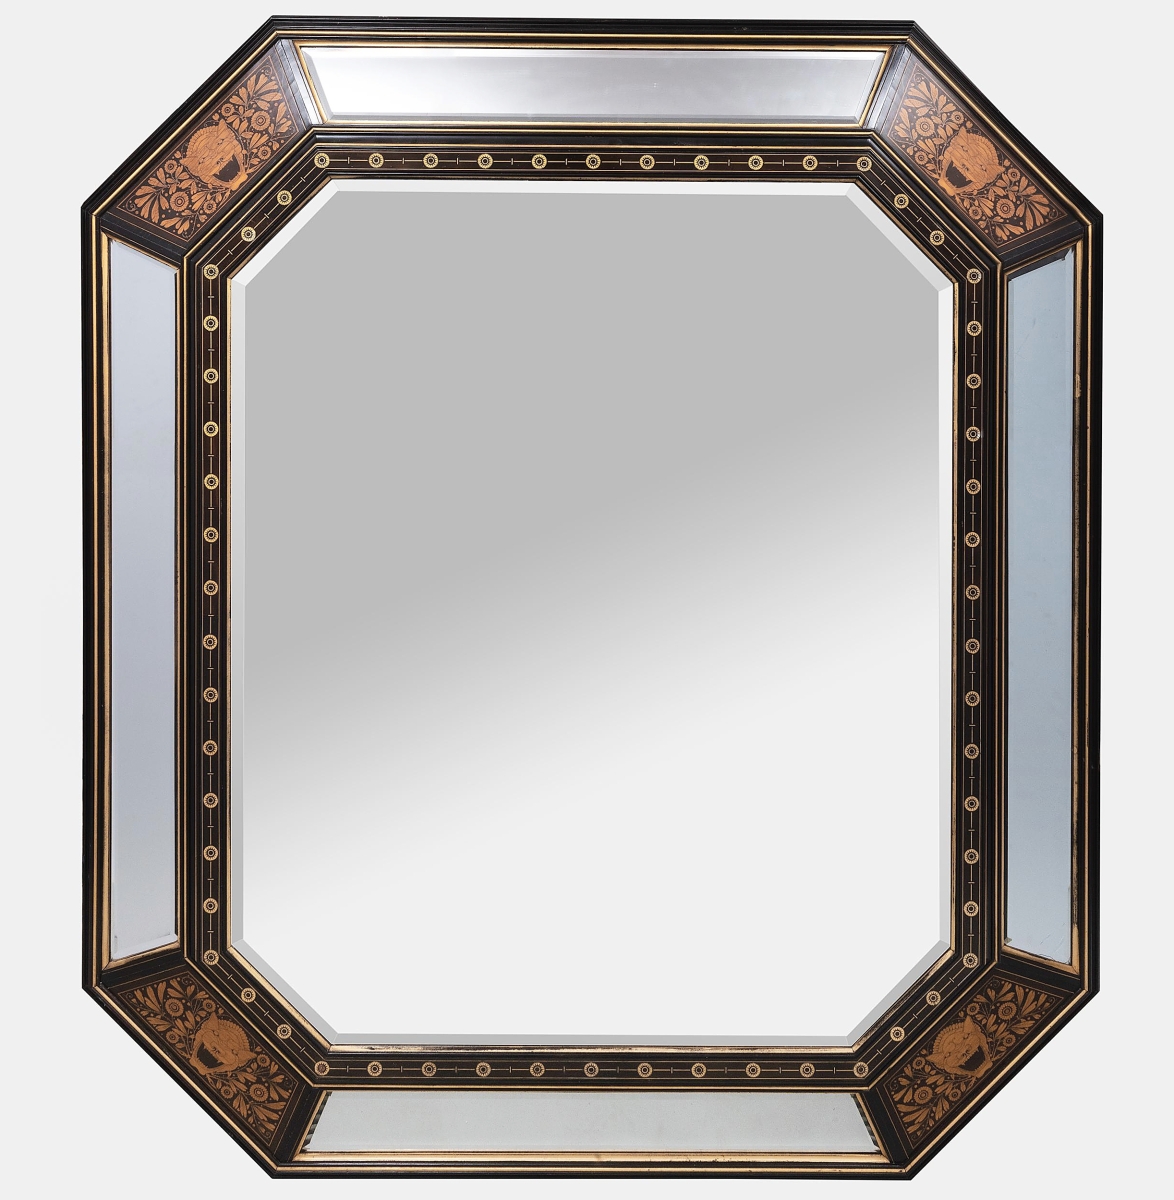 Bringing the second highest price at $25,030 was this American Aesthetic Movement ebony, bone and various wood marquetry and parcel-gilt mirror by Herter Brothers of New York City. It was one of nearly three dozen lots of Aesthetic Movement decorative arts in the sale, from three different collections. A trade buyer bidding online paid the top price ($8/12,000).